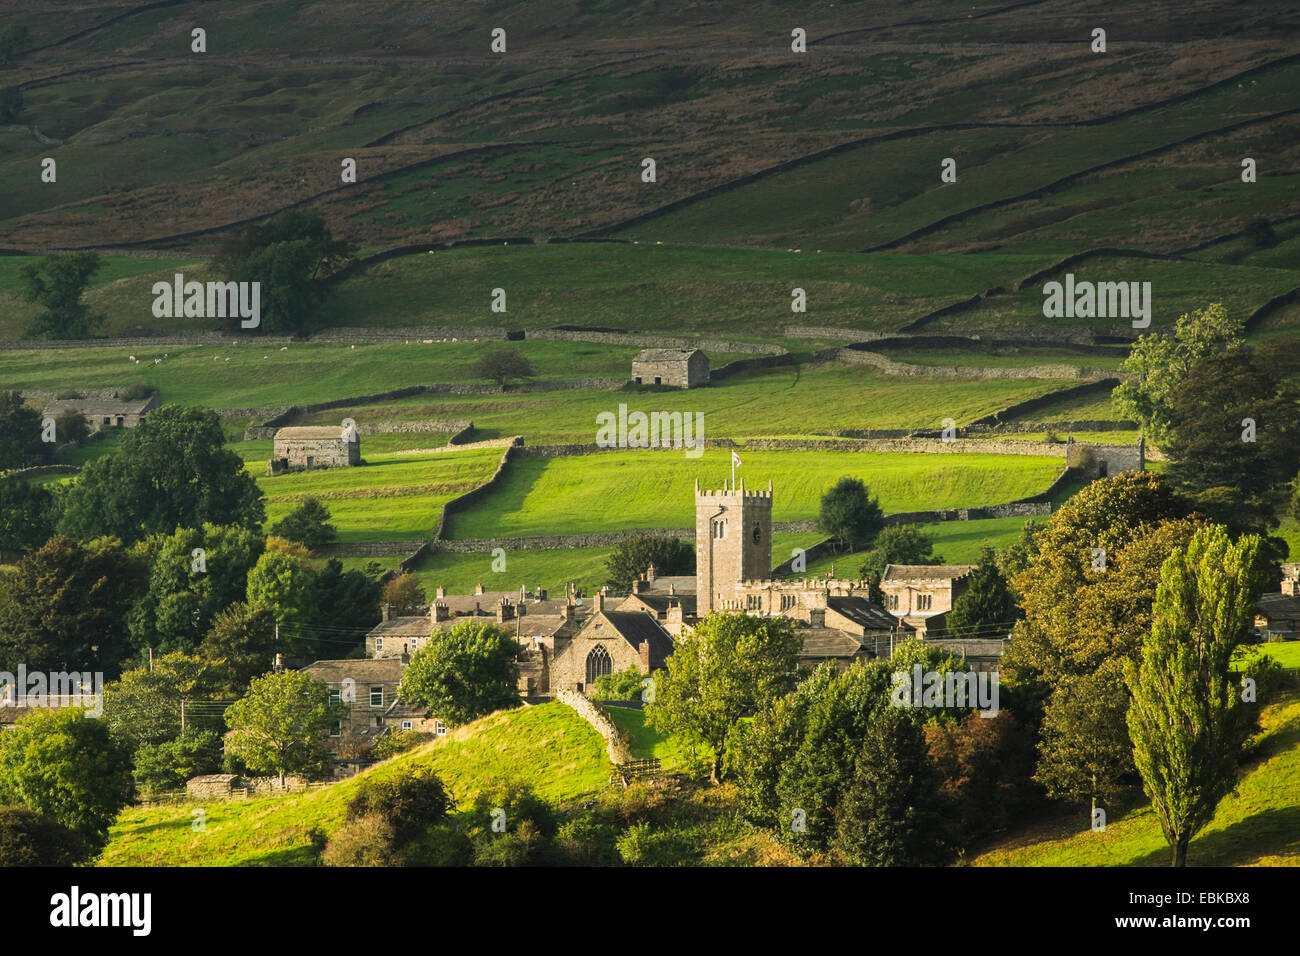 St. Oswalds, the parish church of Askrigg, a village in the Yorkshire Dales National Park, England Stock Photo